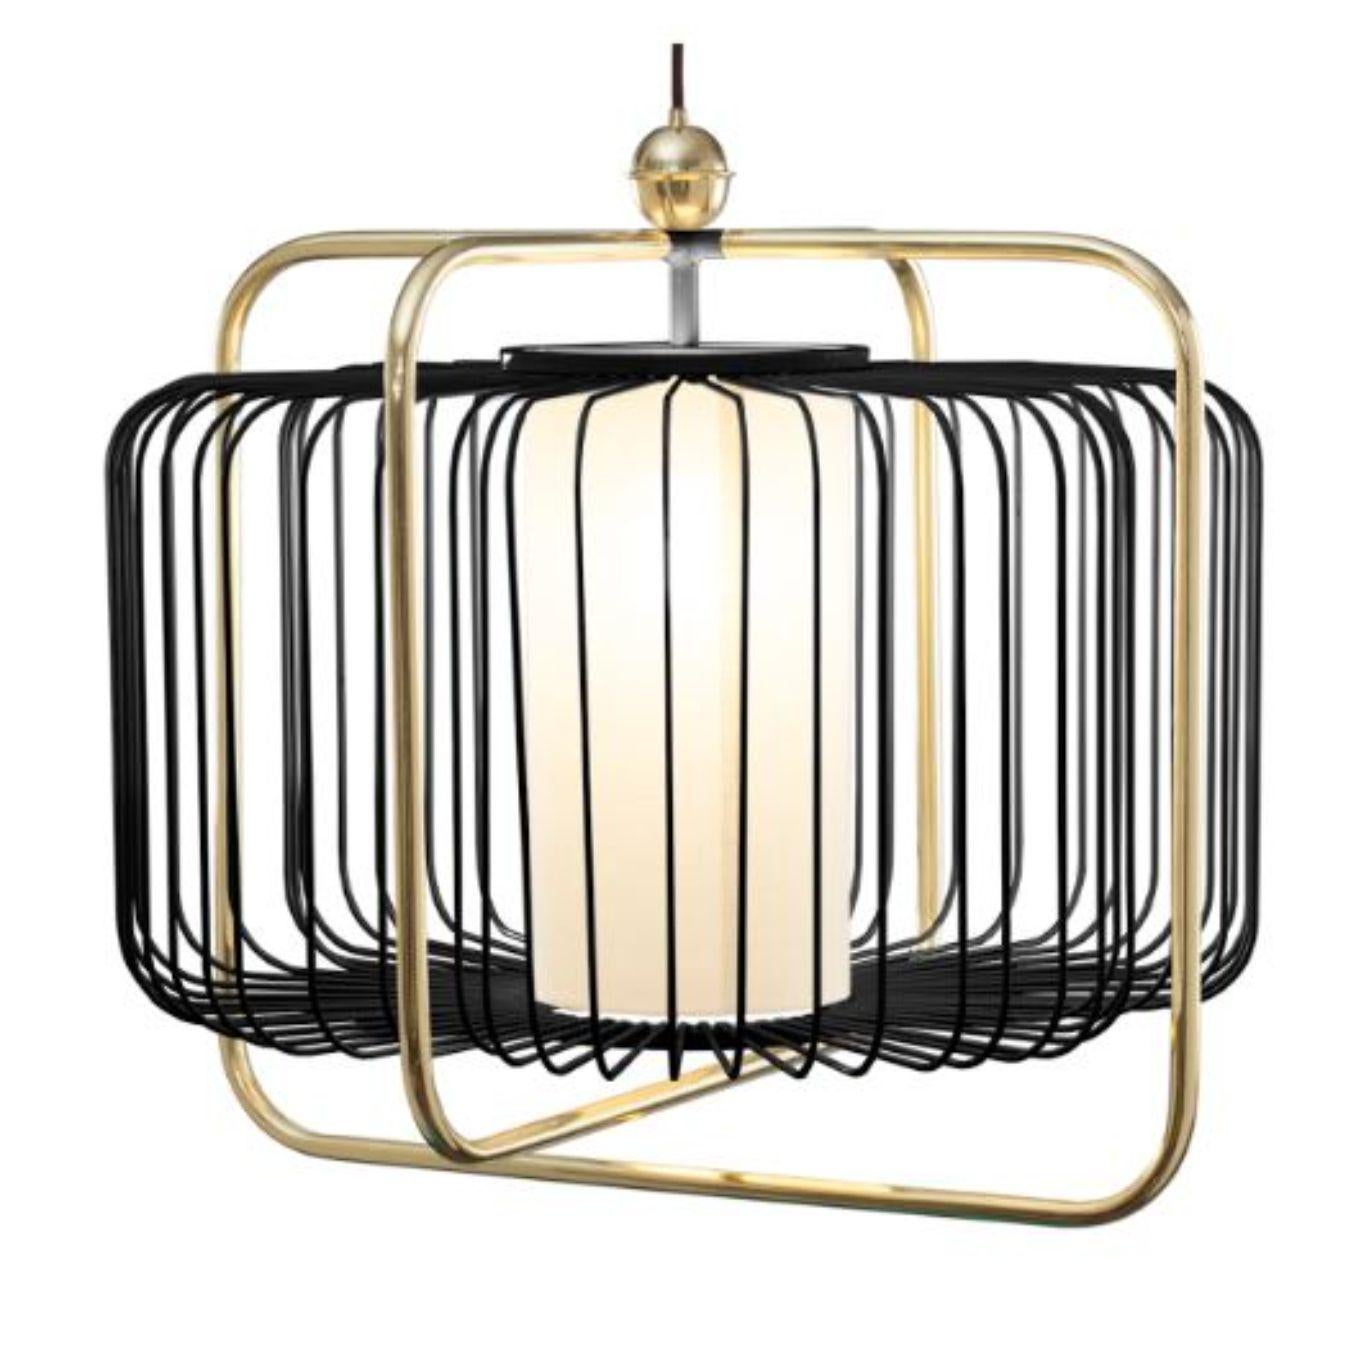 Brass and black Jules I suspension lamp by Dooq
Dimensions: W 63 x D 63 x H 57 cm
Materials: lacquered metal, polished or brushed metal, brass.
abat-jour: cotton
Also available in different colours and